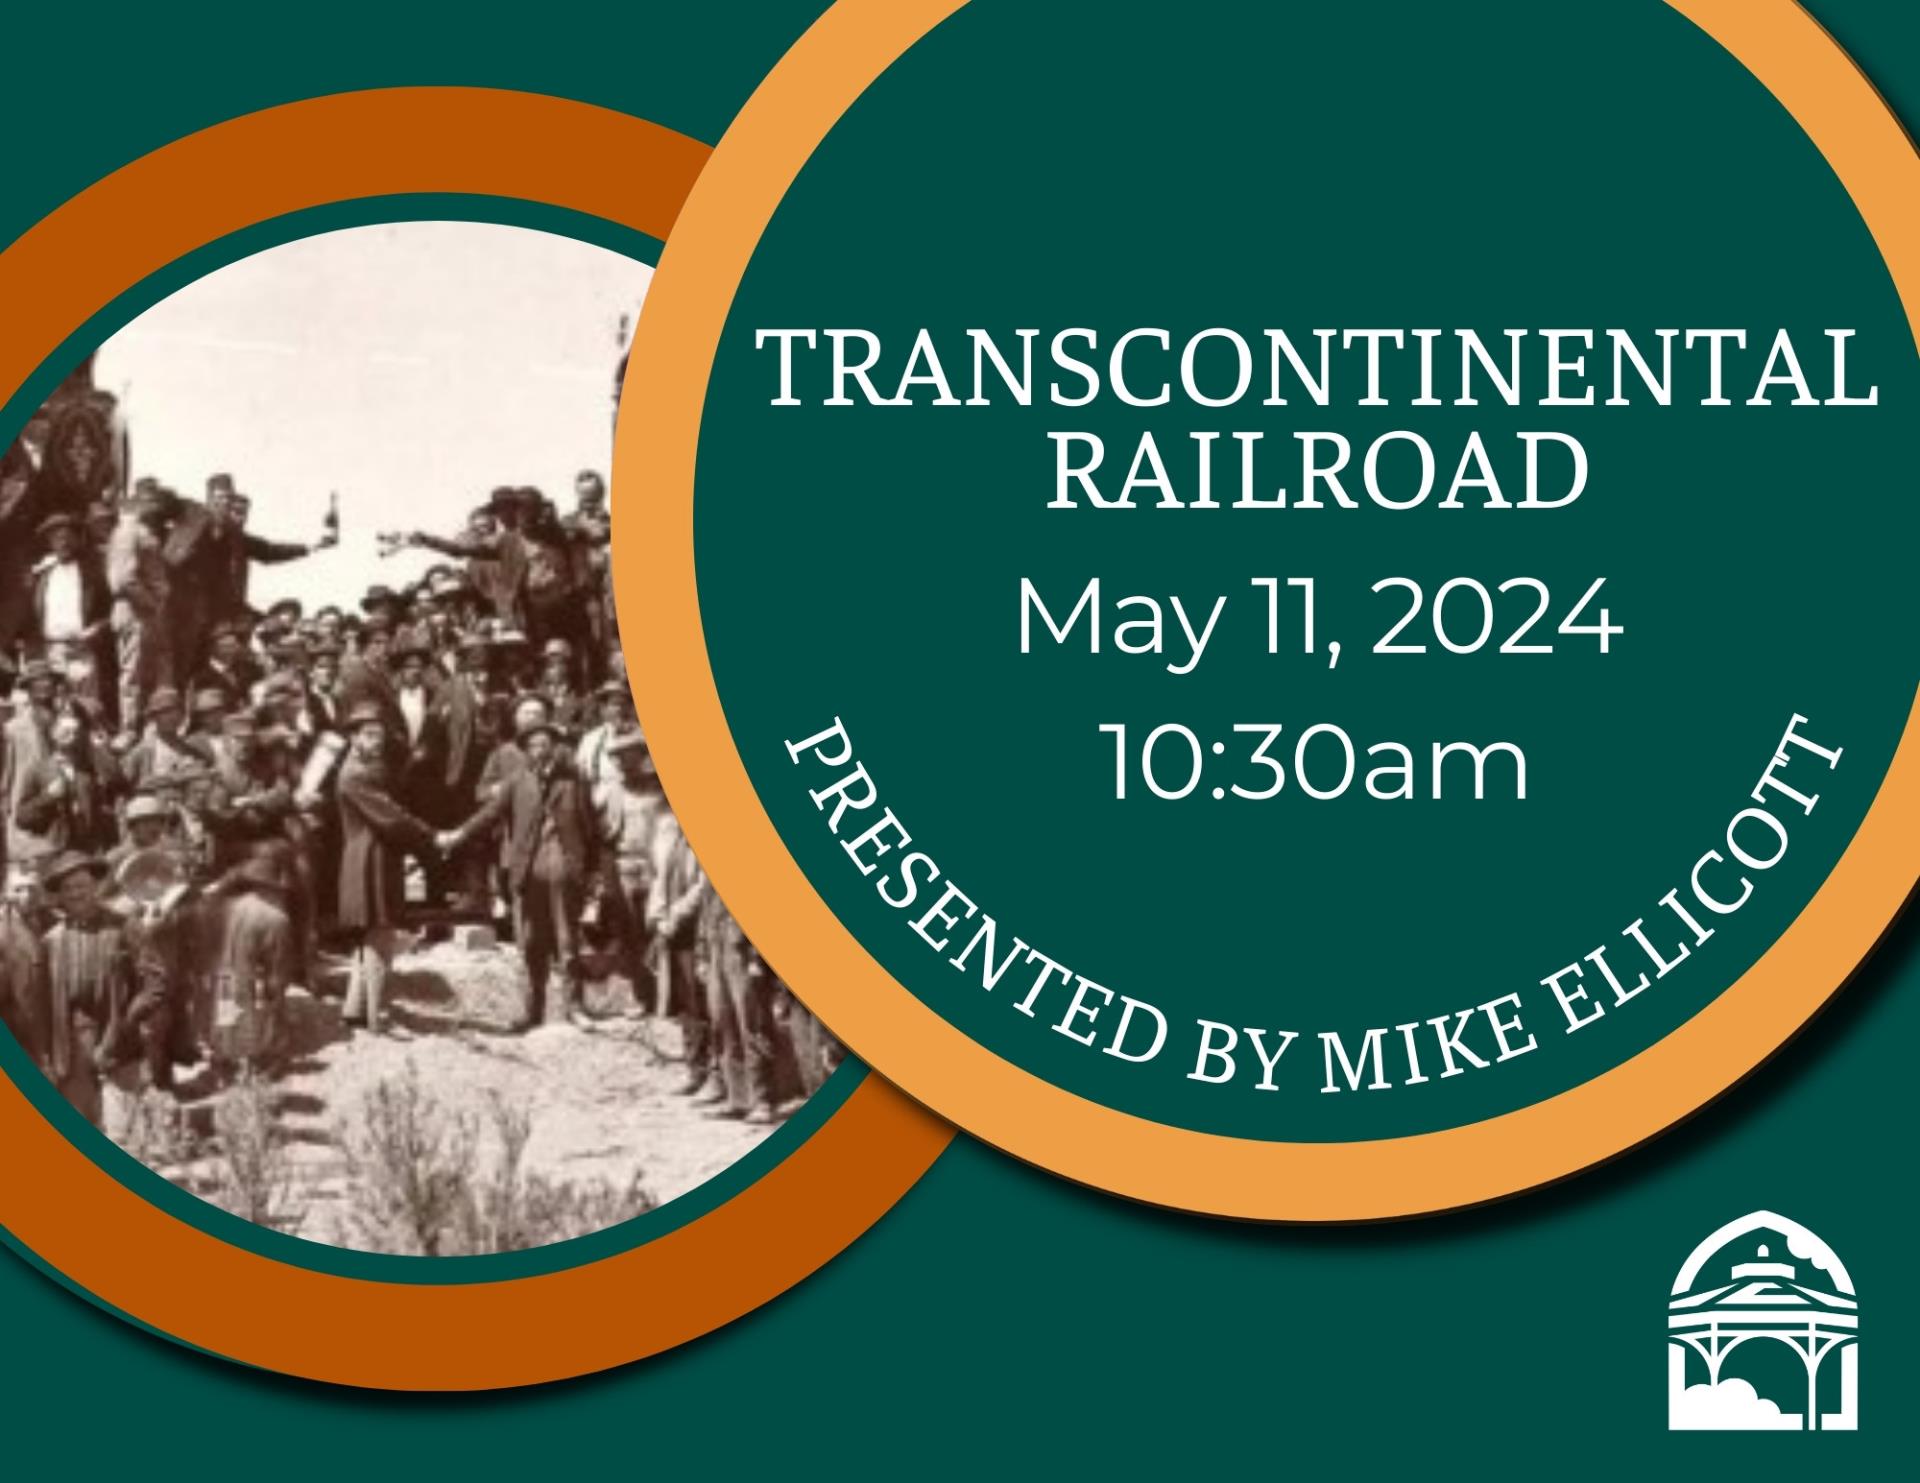 Discover the Transcontinental Railroad